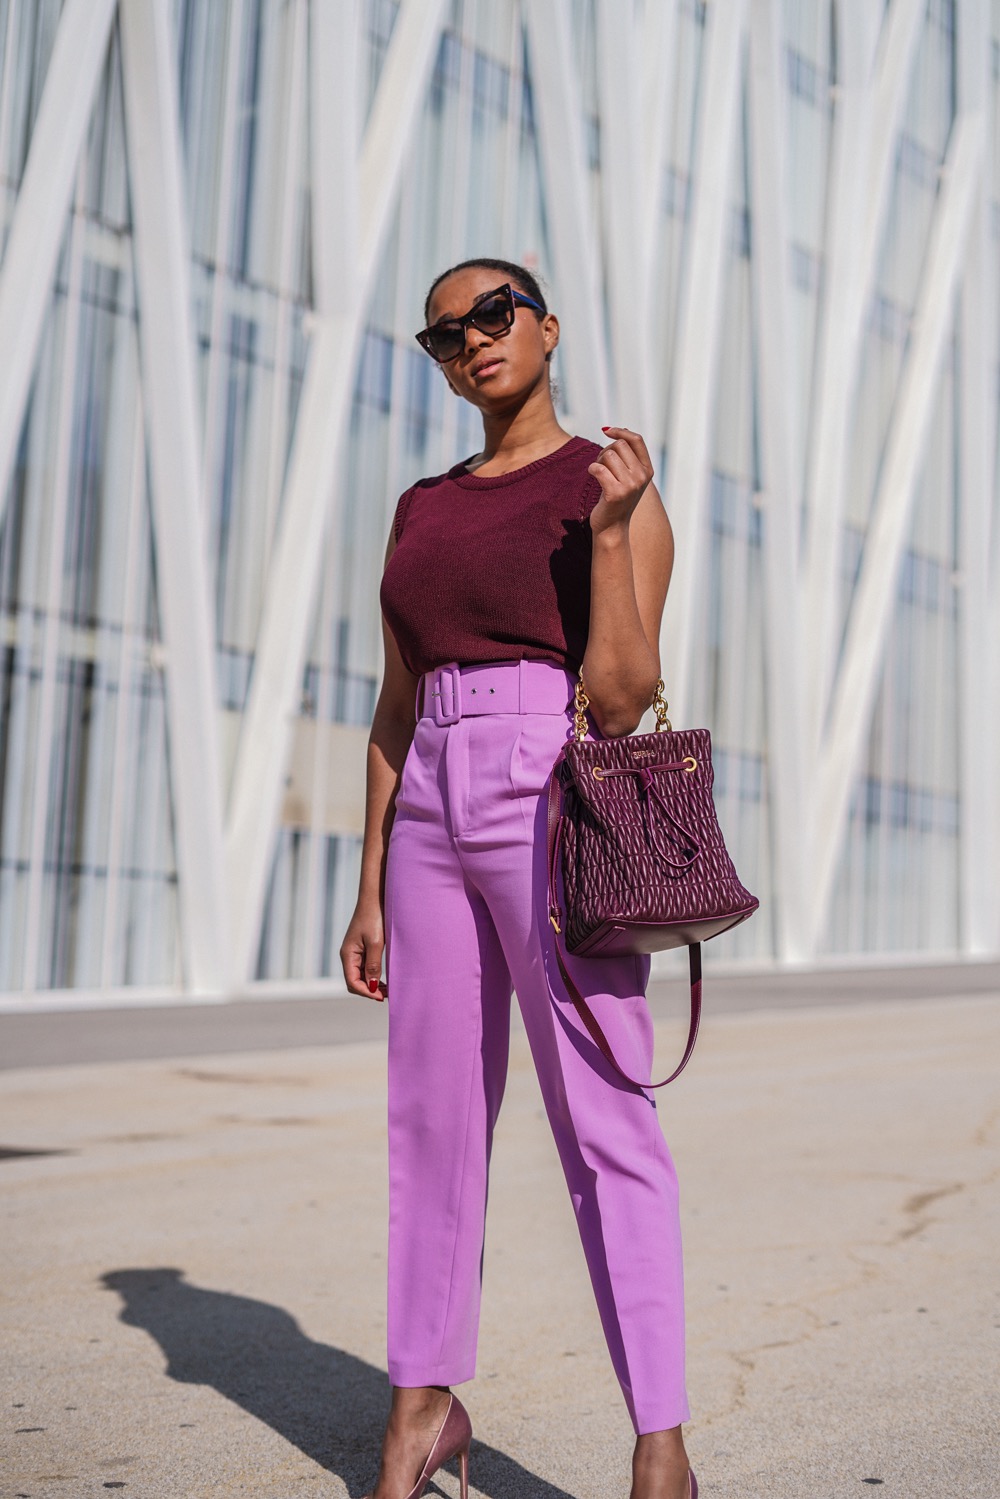 German fashion blogger wearing an all lilac look